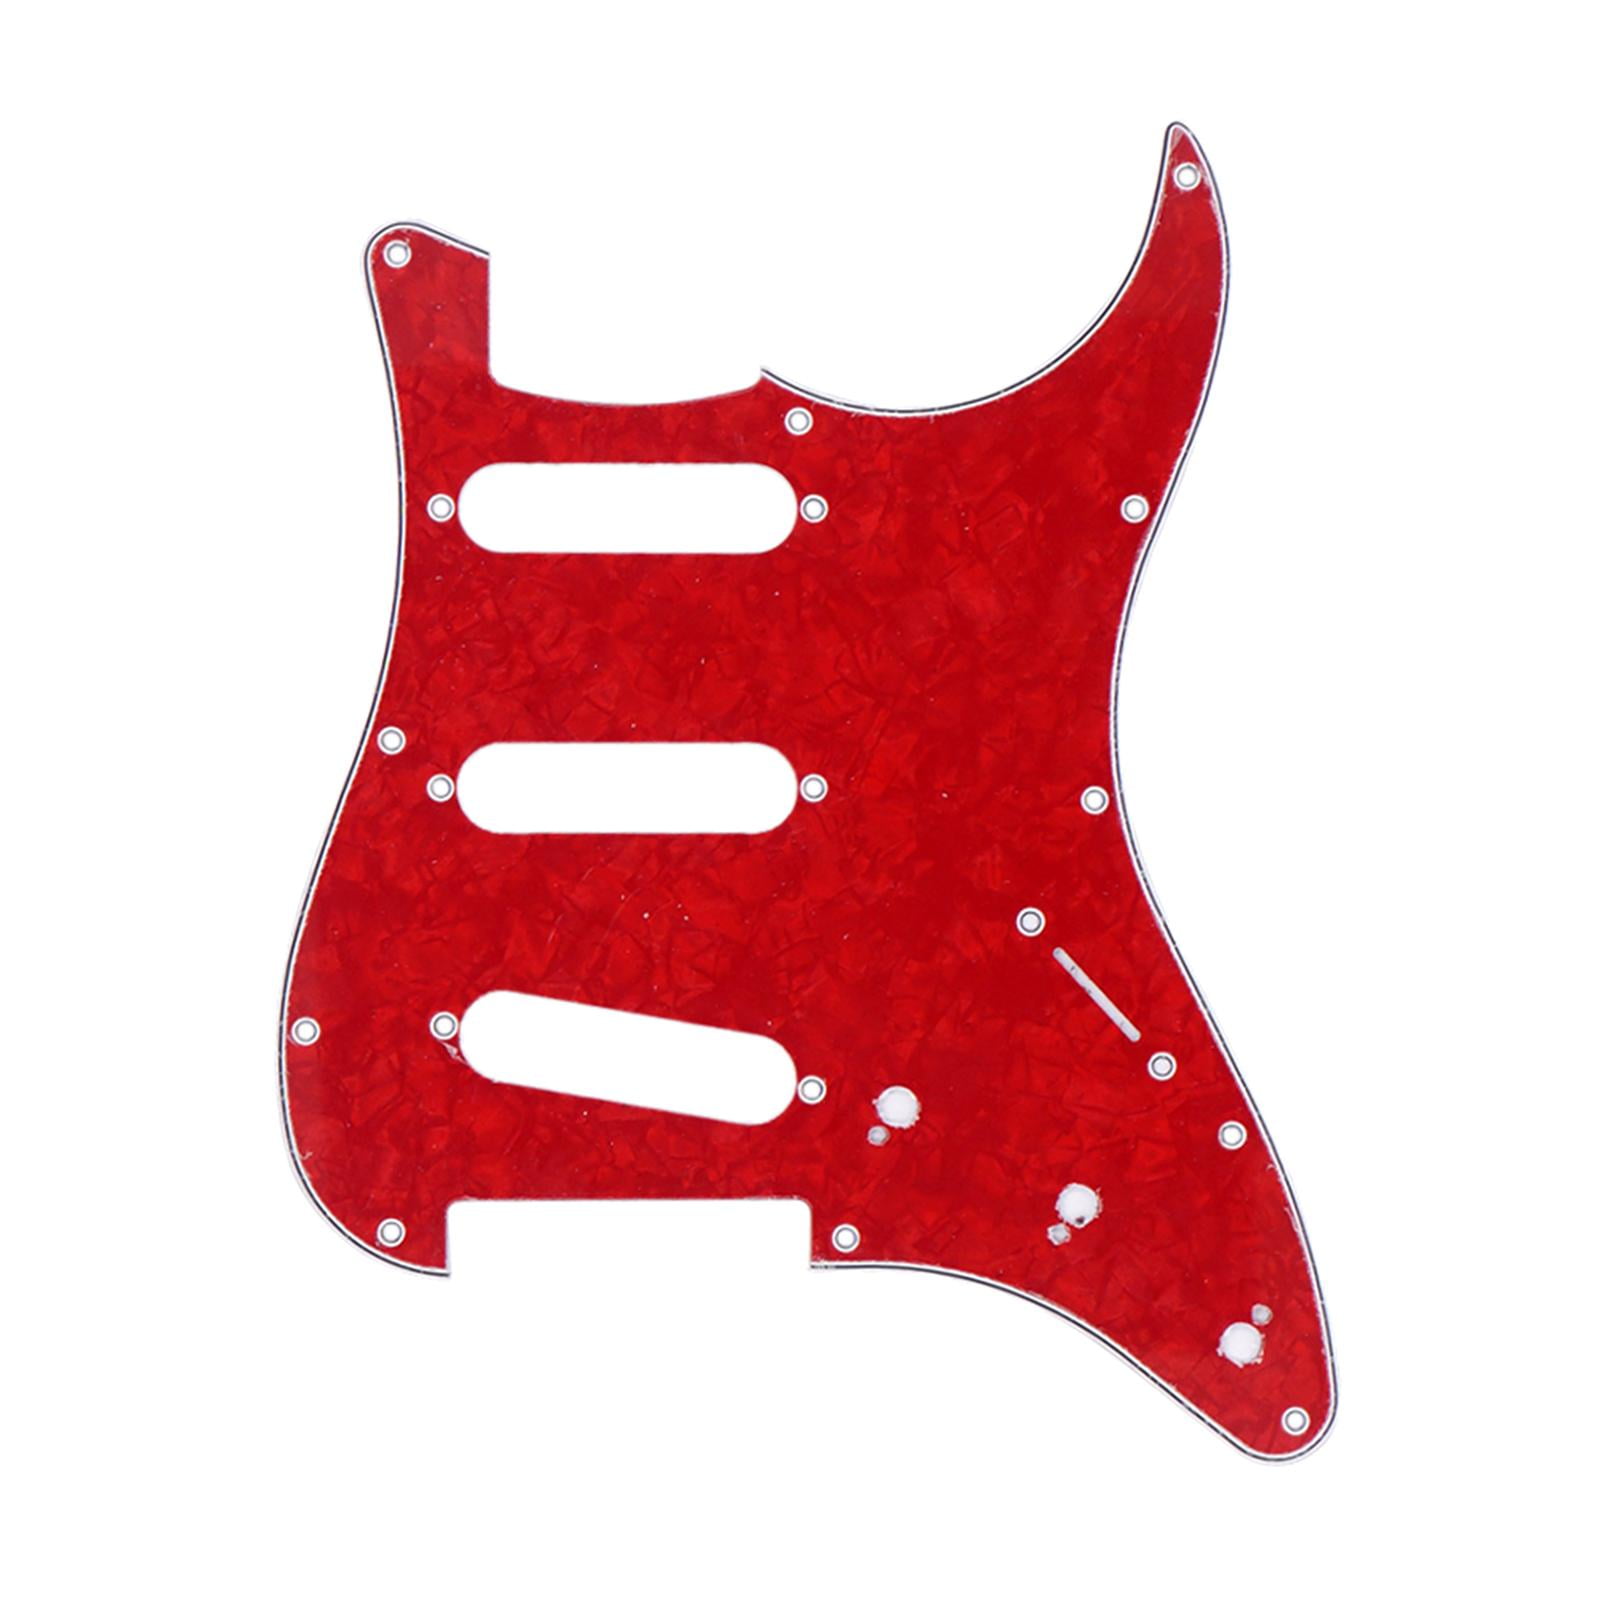 Musiclily 11 Hole SSS Strat Electric Guitar Pickguard for Fender USA/Mexican Made Standard Stratocaster Modern Style Guitar Parts,4Ply Zebra Stripe 